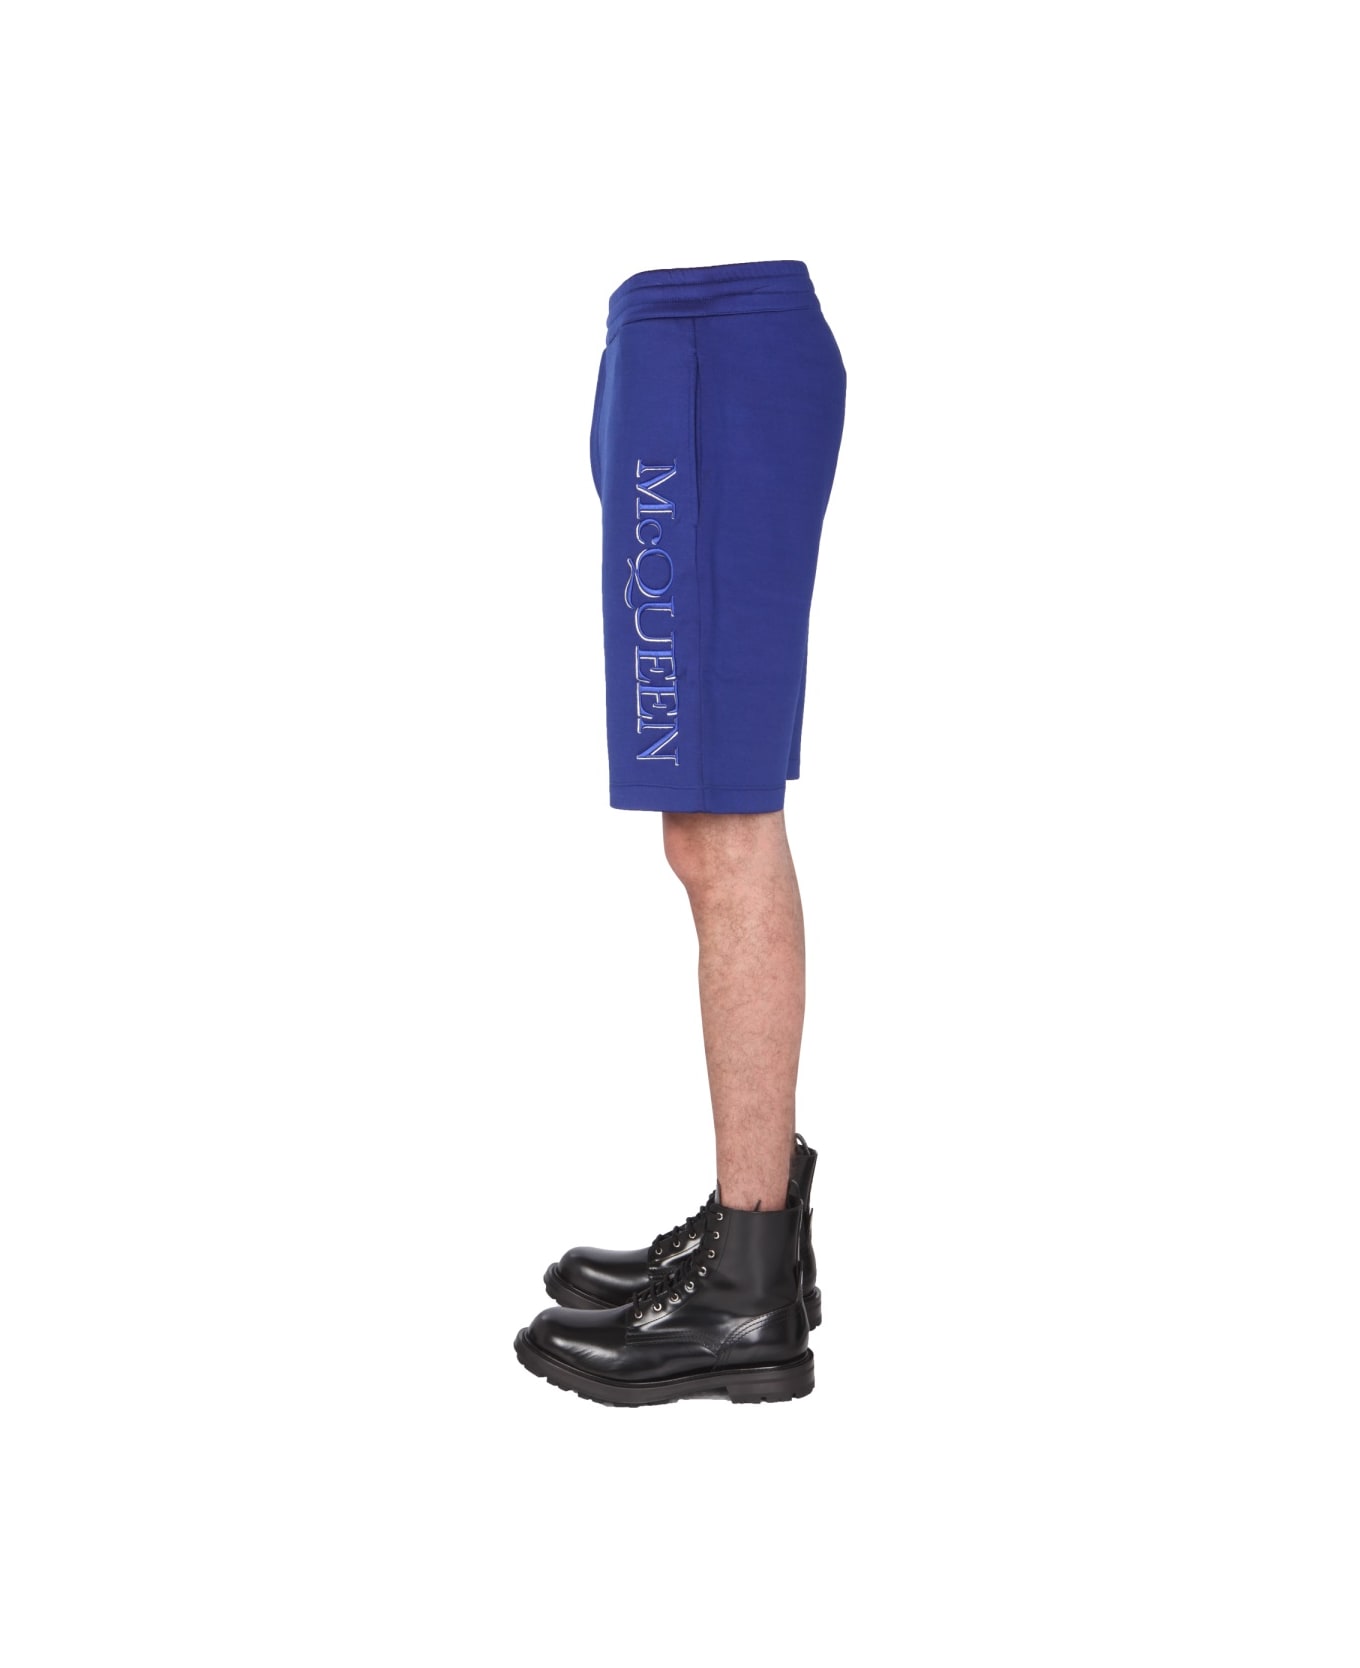 Alexander McQueen Shorts With Embroidered Logo - BLUE